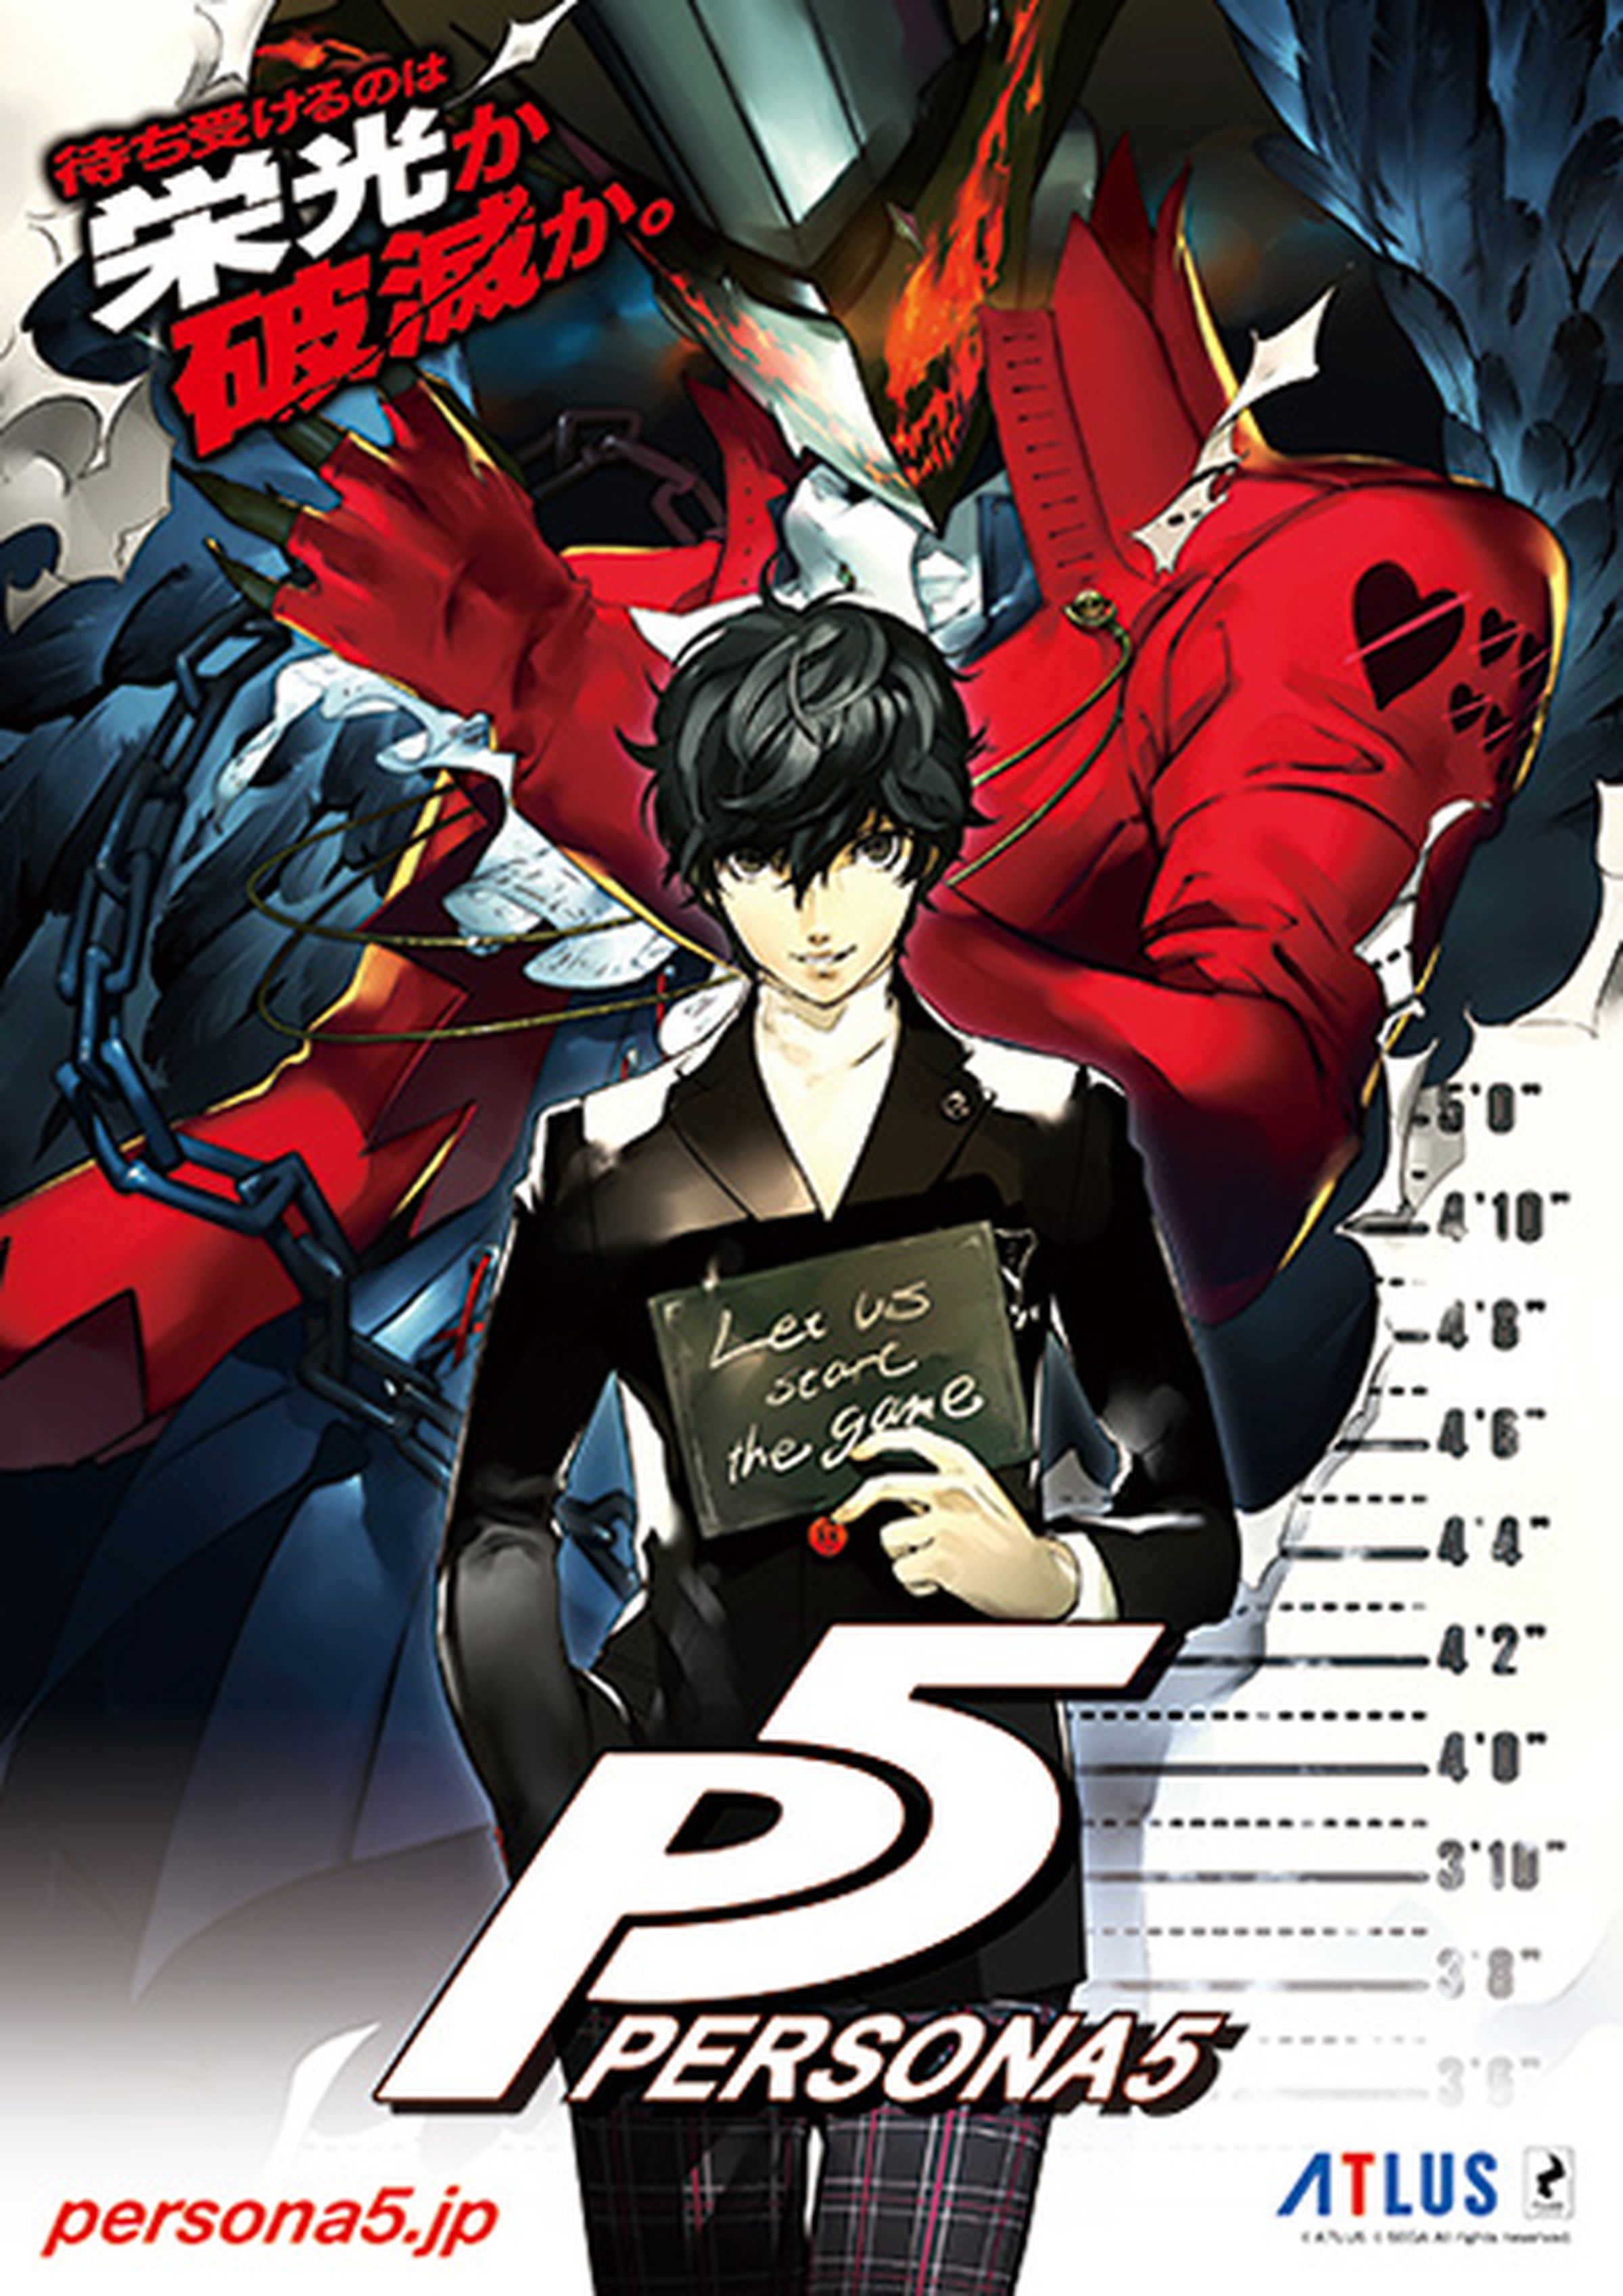 Persona 5 poster